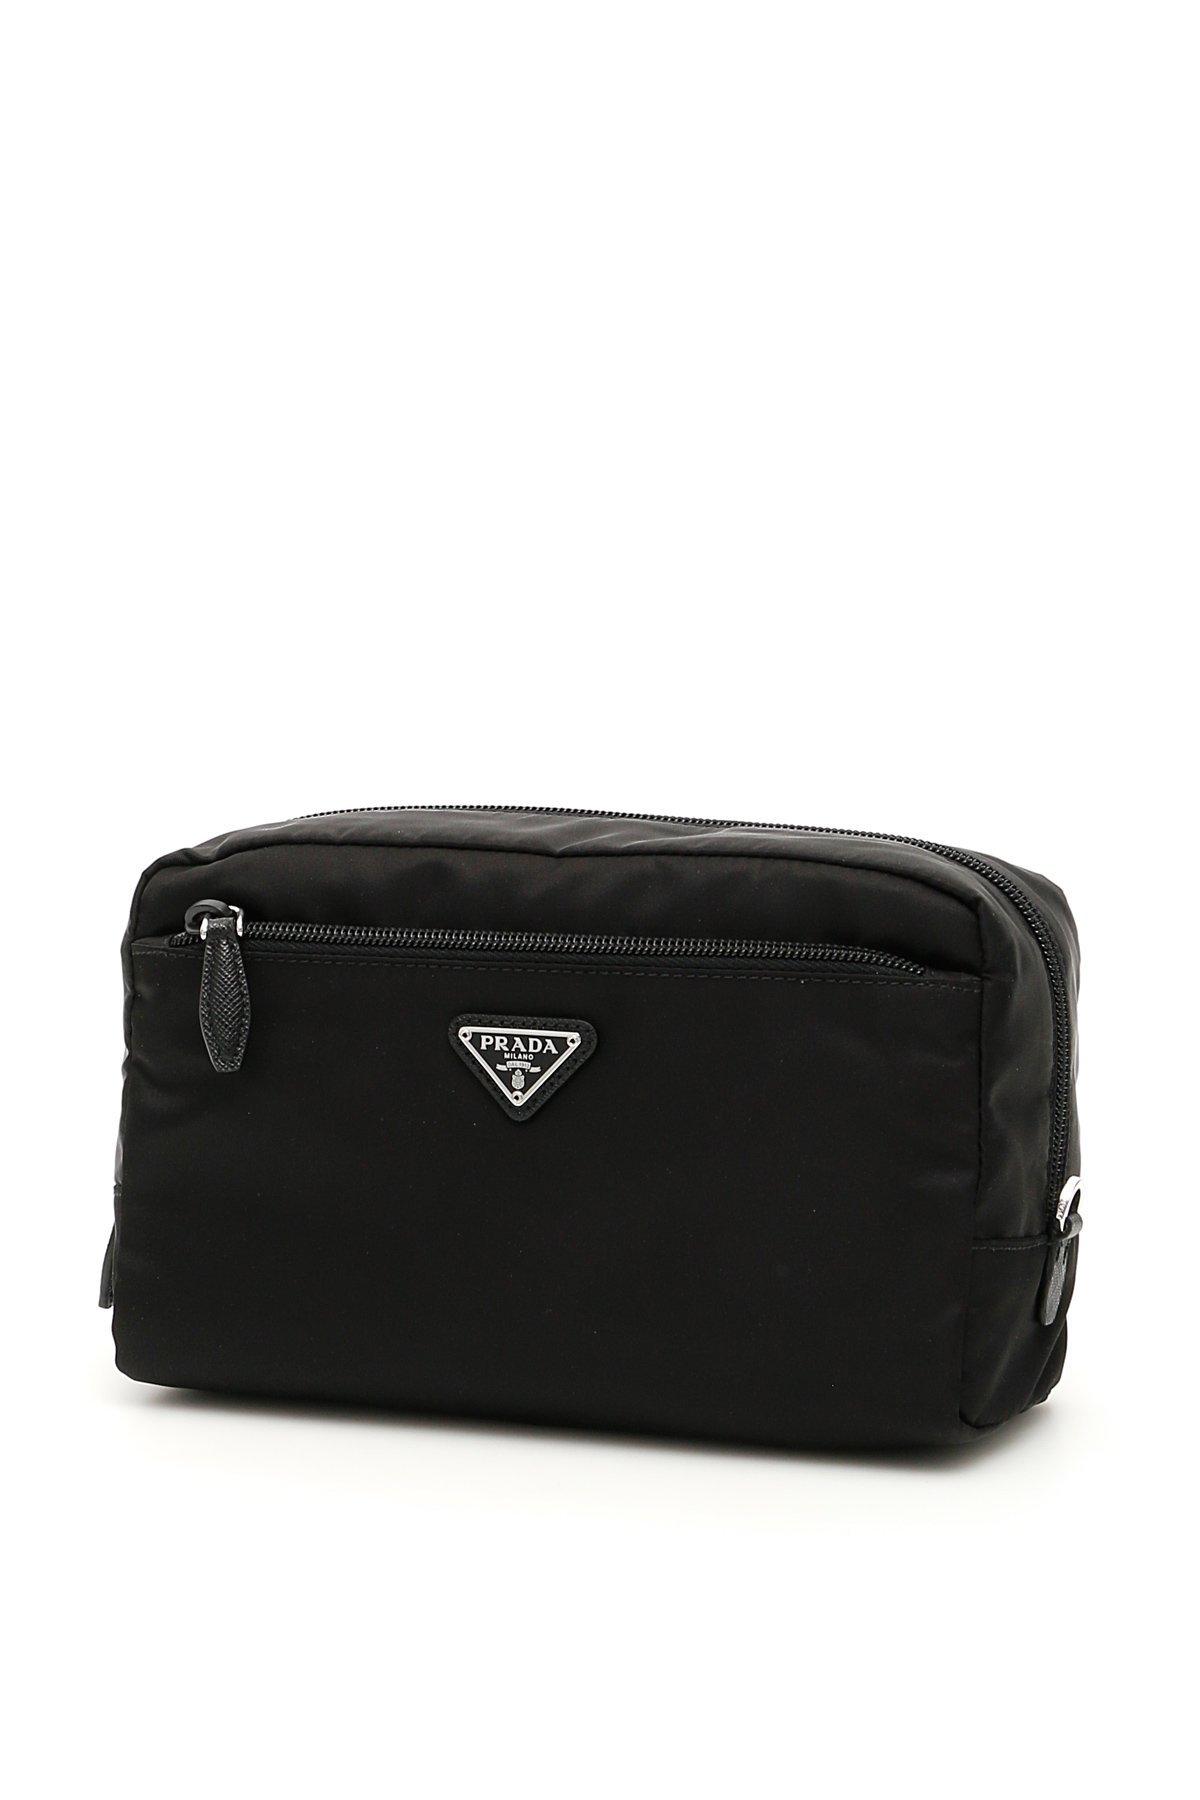 Prada Synthetic Zipped Logo Cosmetic Pouch in Black - Lyst